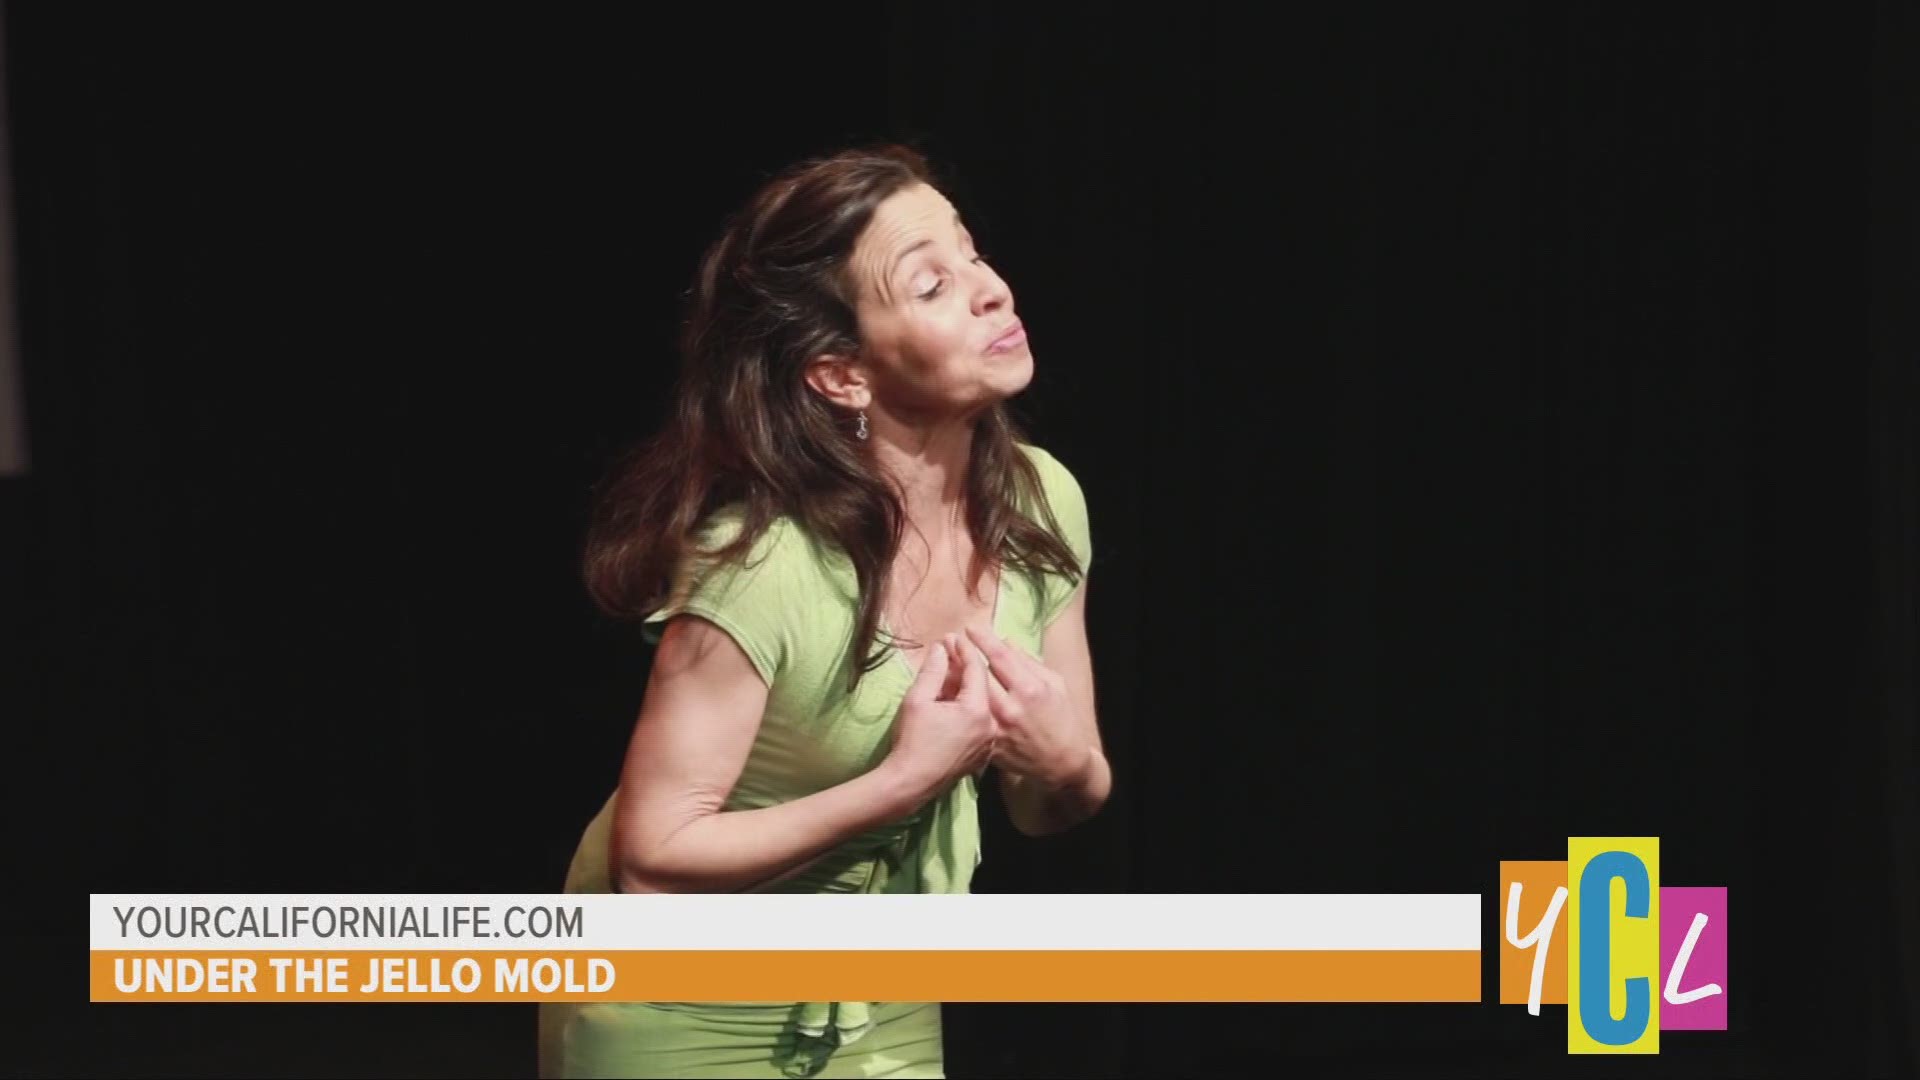 We chat with award winning actress Jennie Fahn about her show, ‘Under the Jello Mold’.